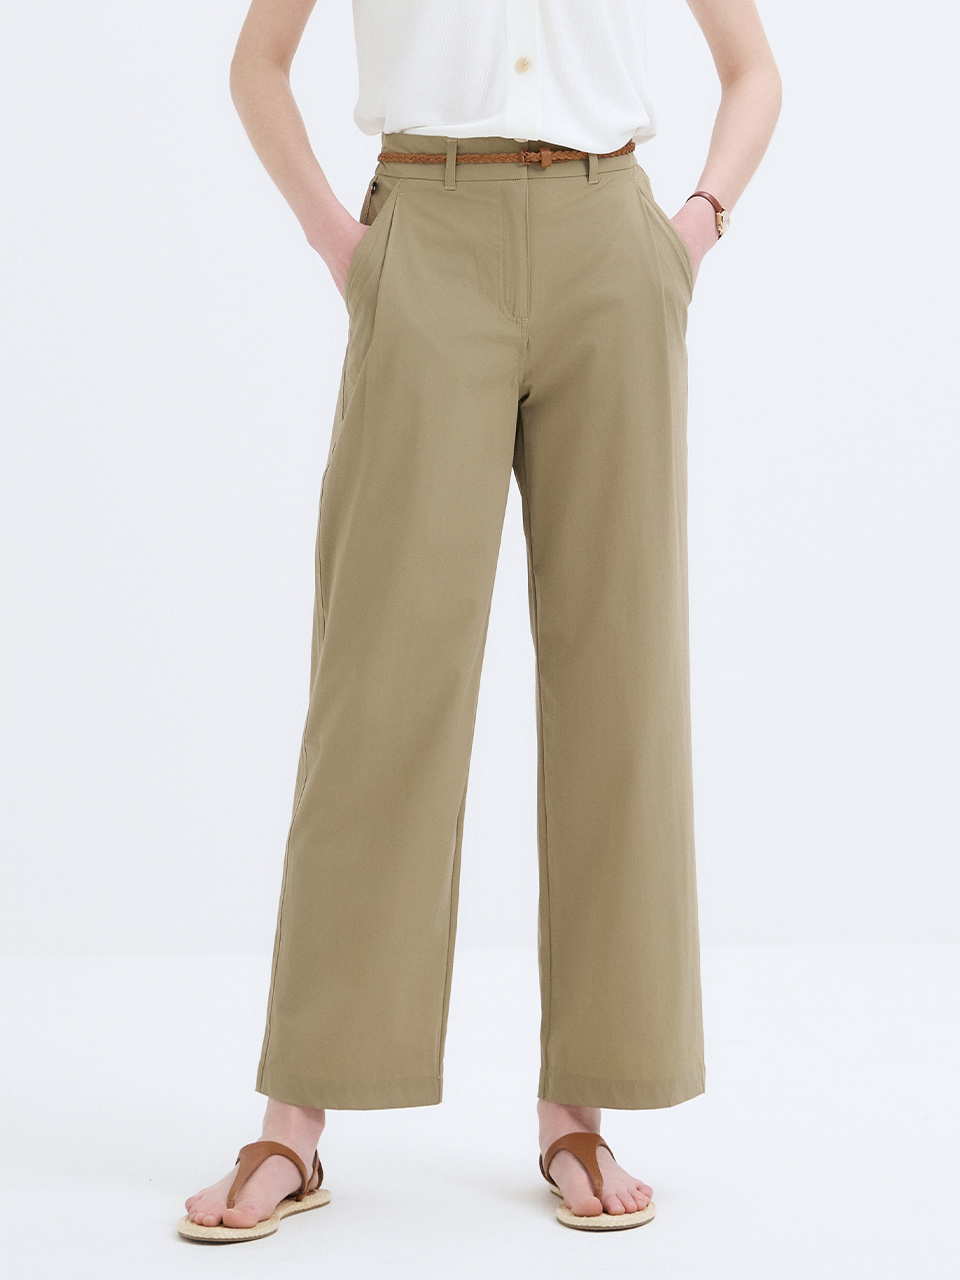 NEW SIGNATURE PERFECT FIT COLLPANTS (FOR WOMEN) - CINNAMON BEIGE